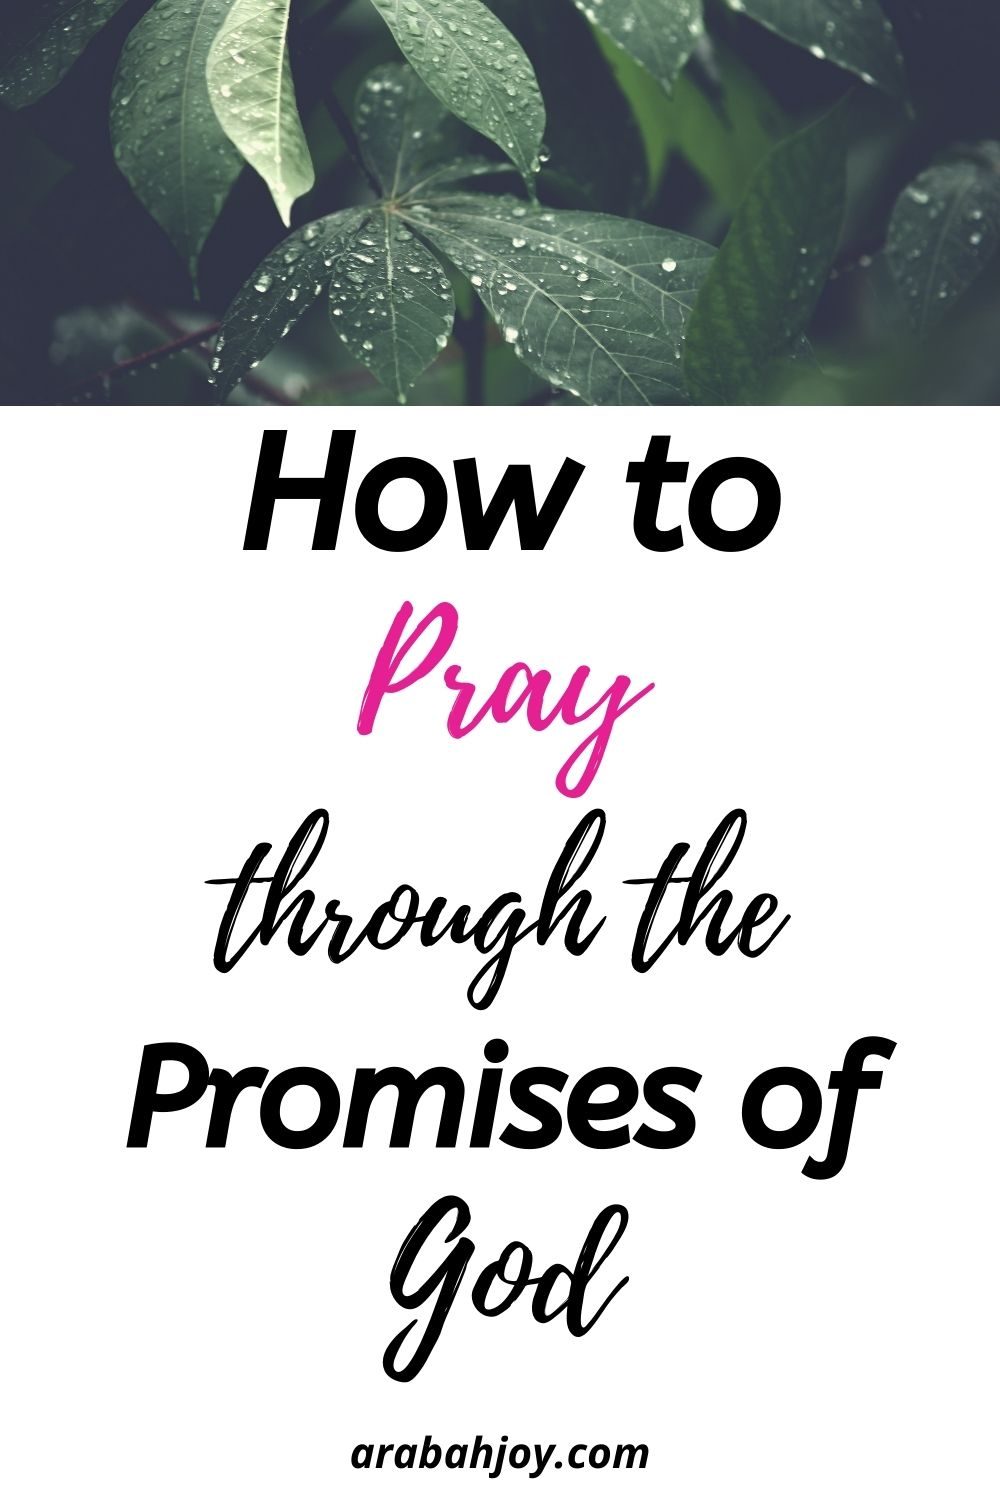 How to pray through the promises of God